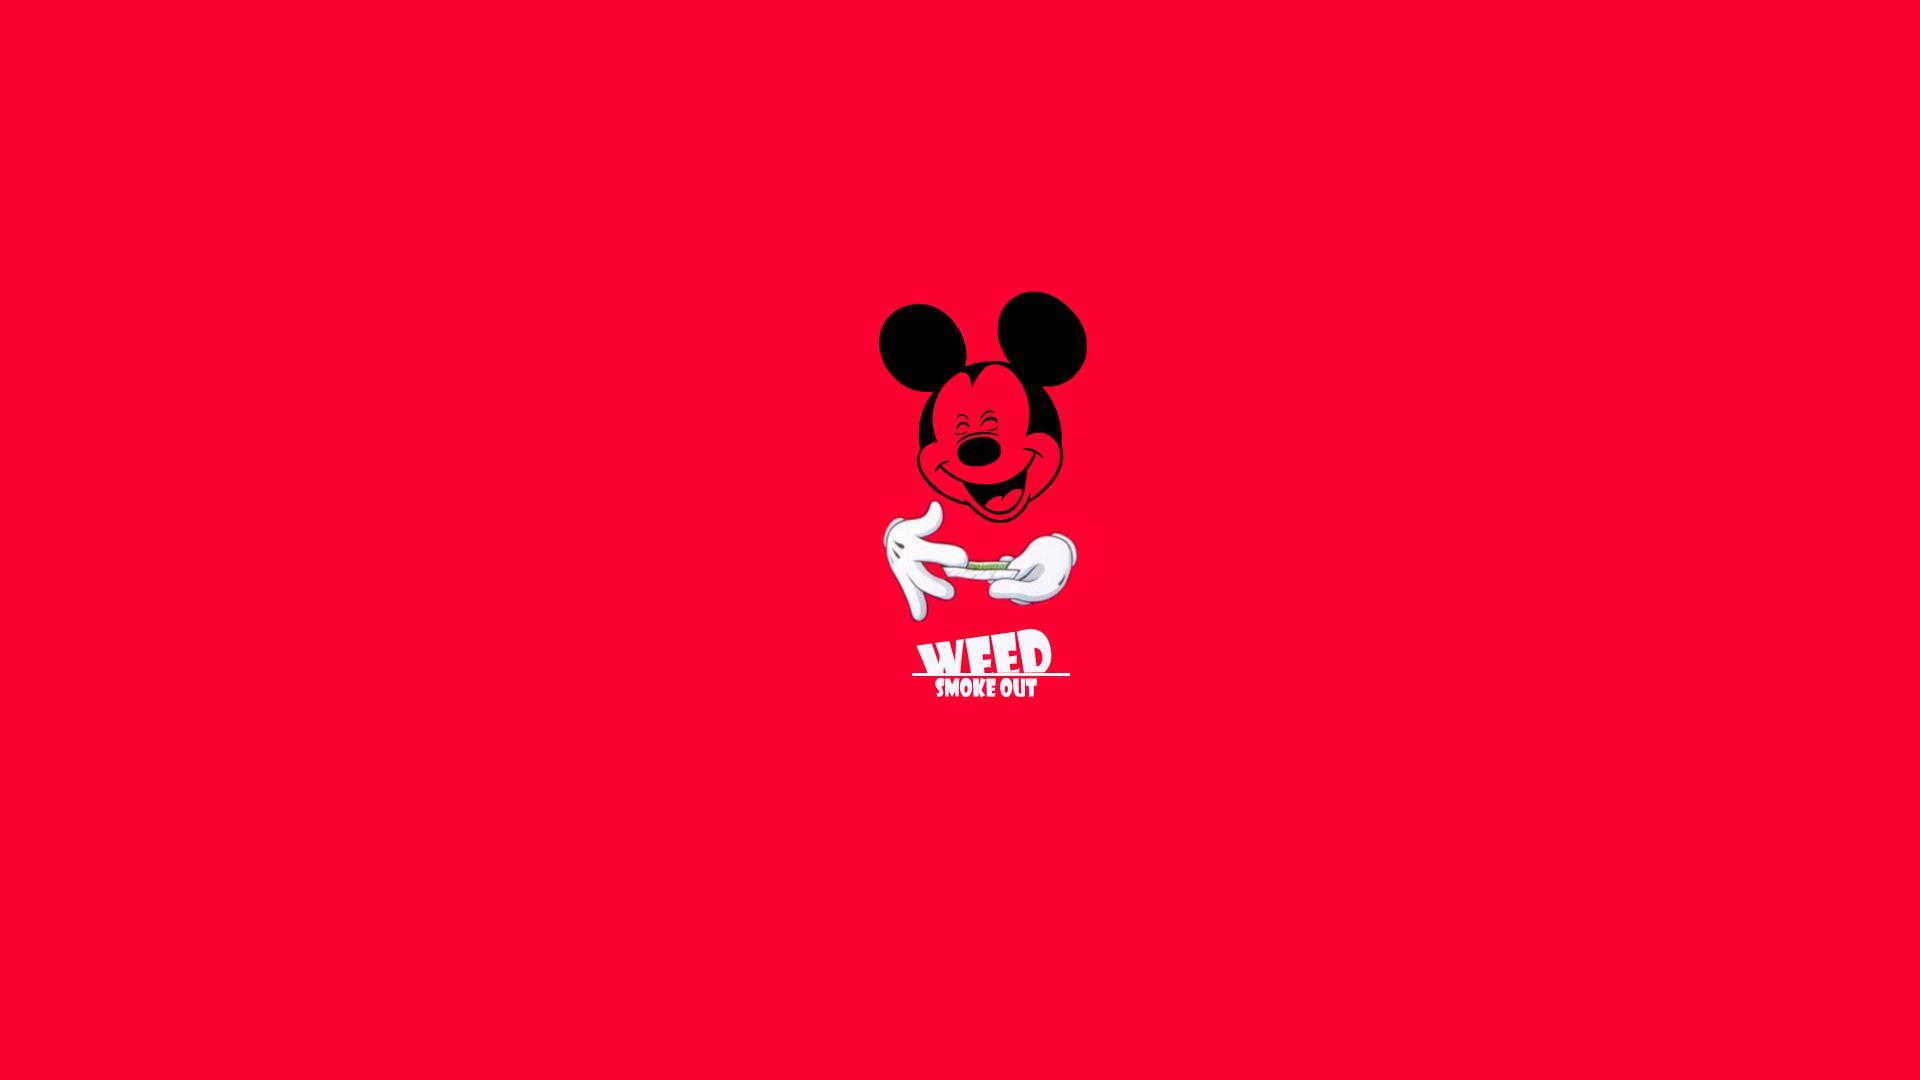 Swag Wallpaper Luxury Download Wallpaper Kanabis Mickey Mouse Swag